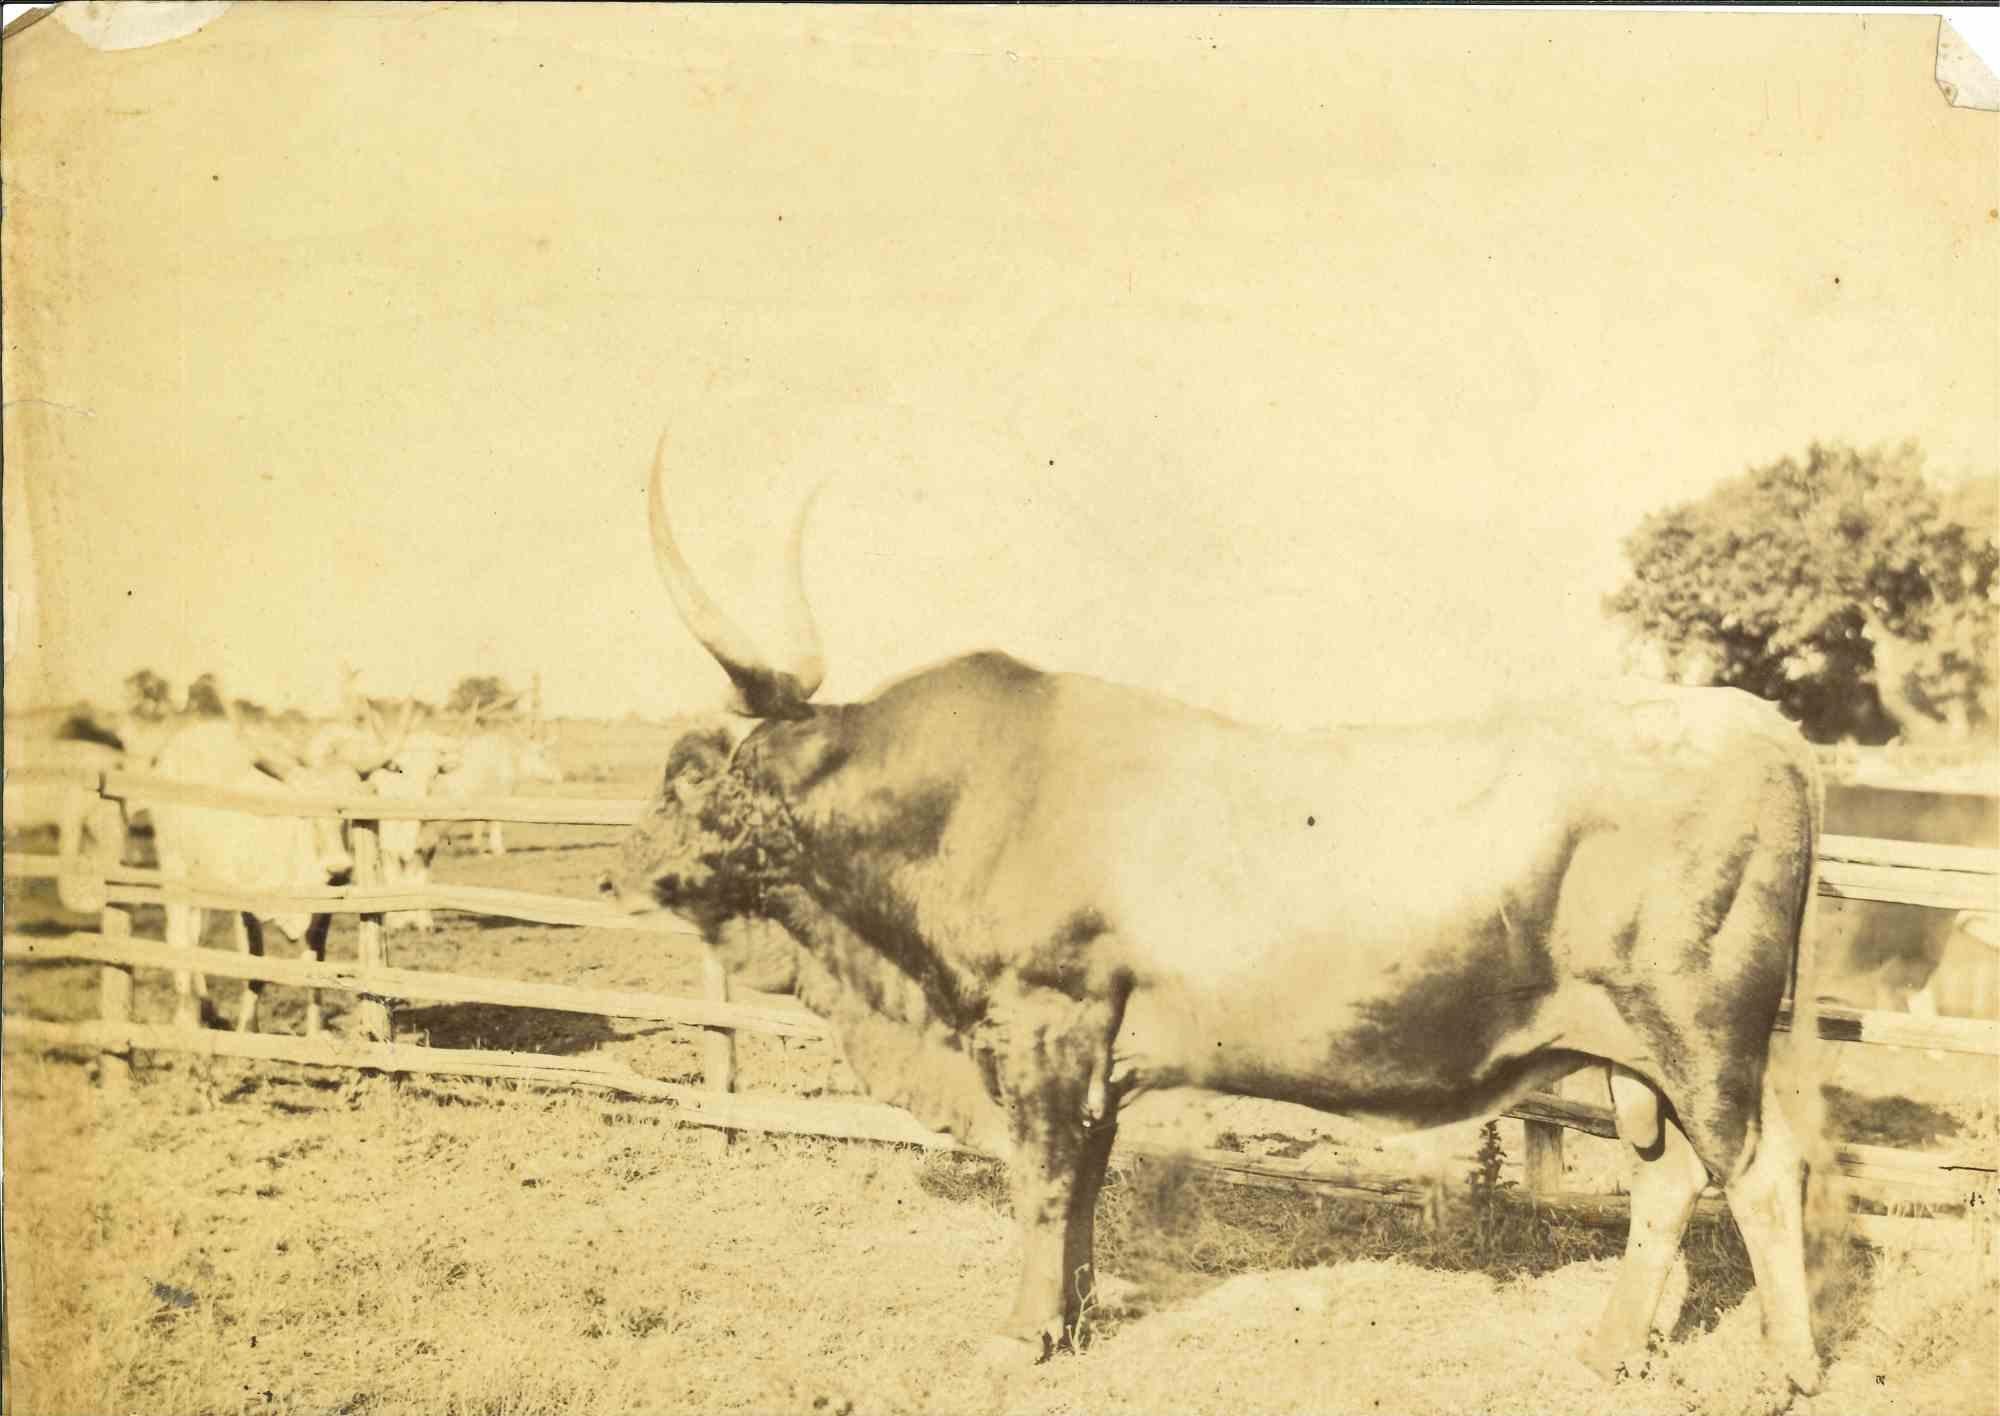 Unknown Figurative Photograph - The Old Days Photo - Herd - Vintage photo - Early 20th Century